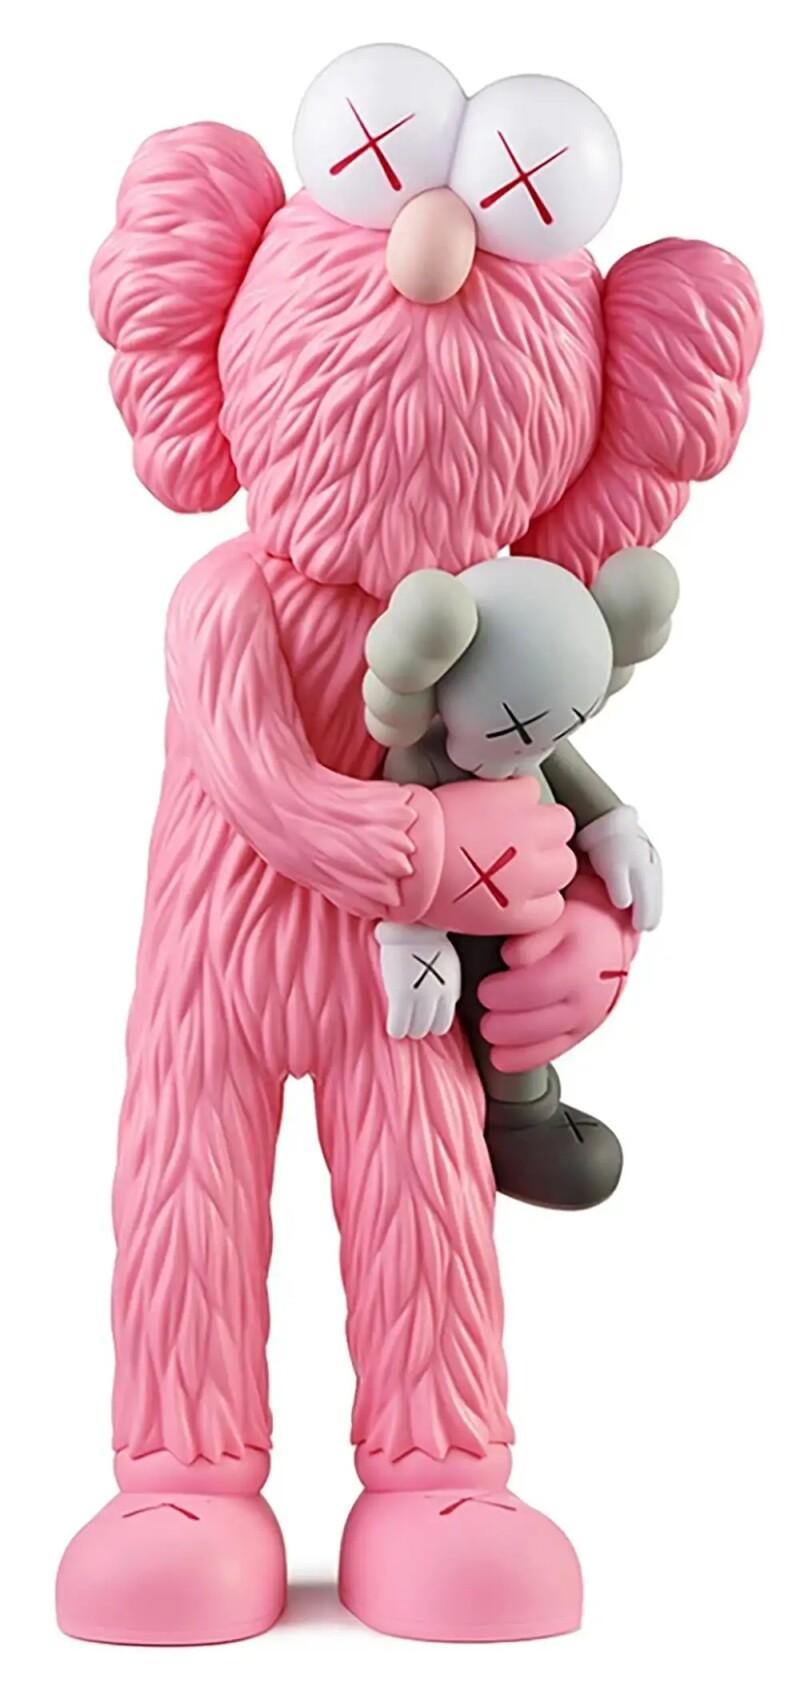 KAWS Medicom Toy TAKE Pink Available For Immediate Sale At Sothebys